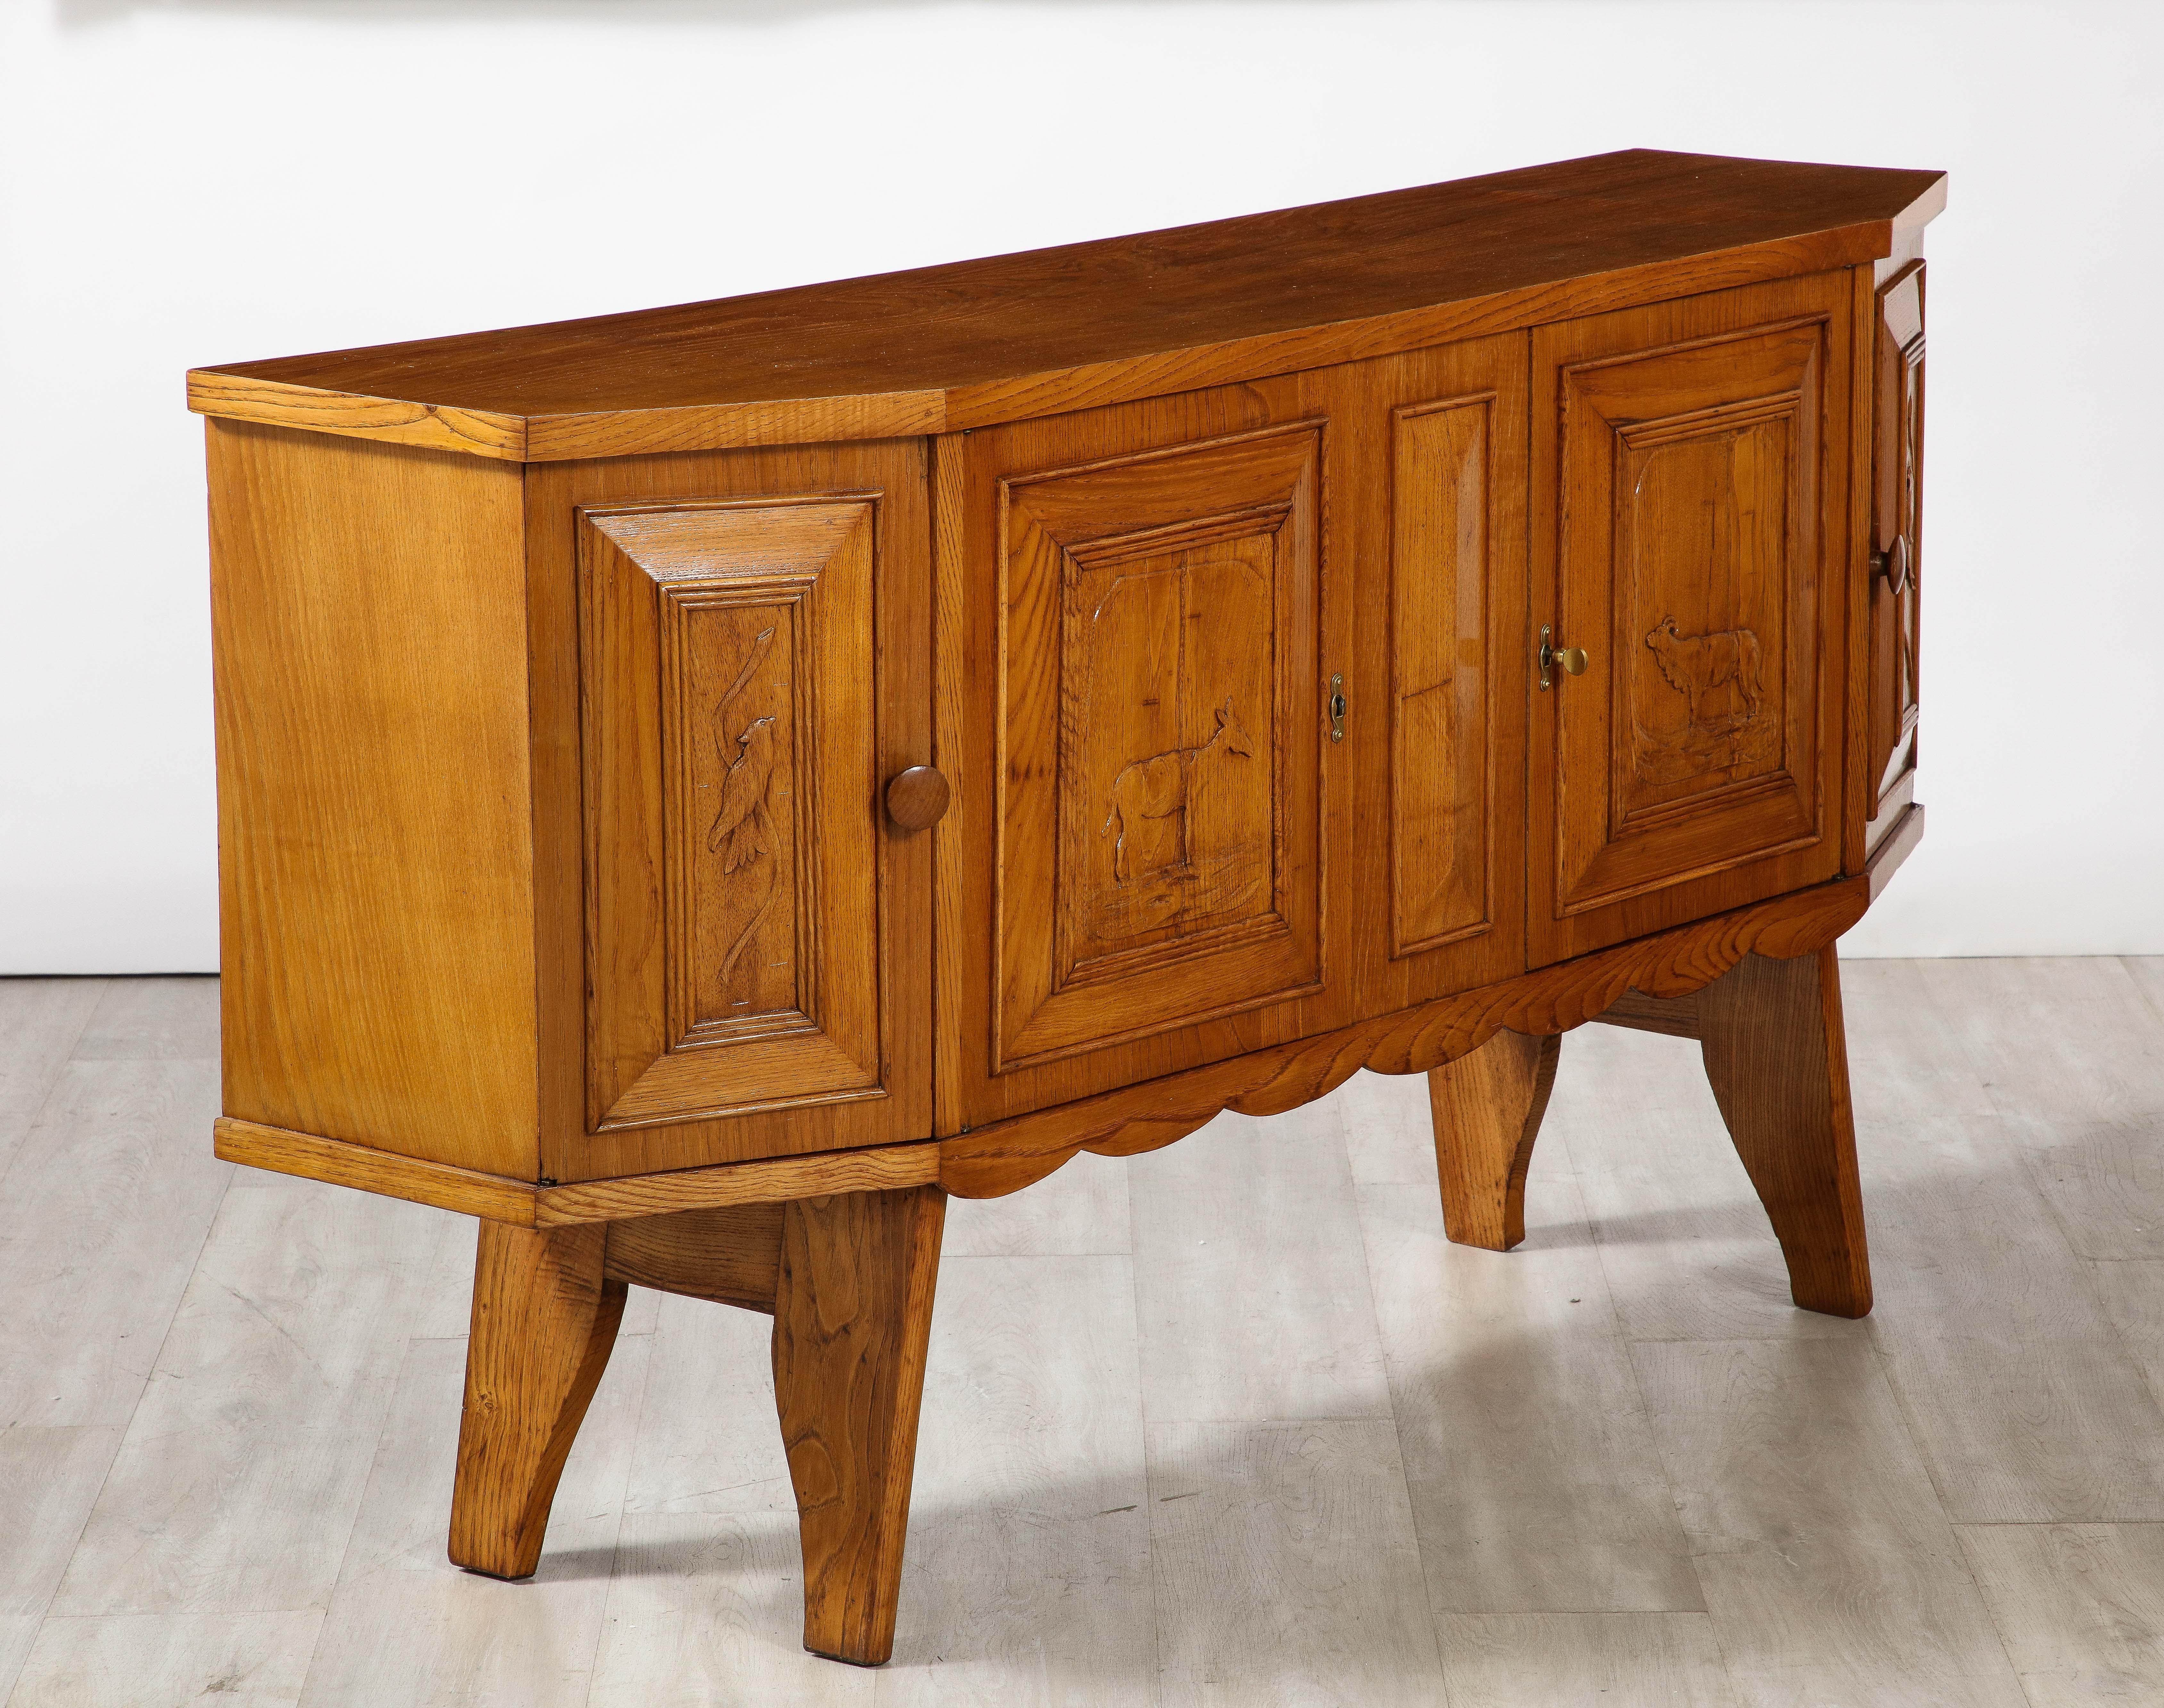 Italian Tuscan Art Deco Carved Oak Sideboard or Credenza, circa 1940 For Sale 8